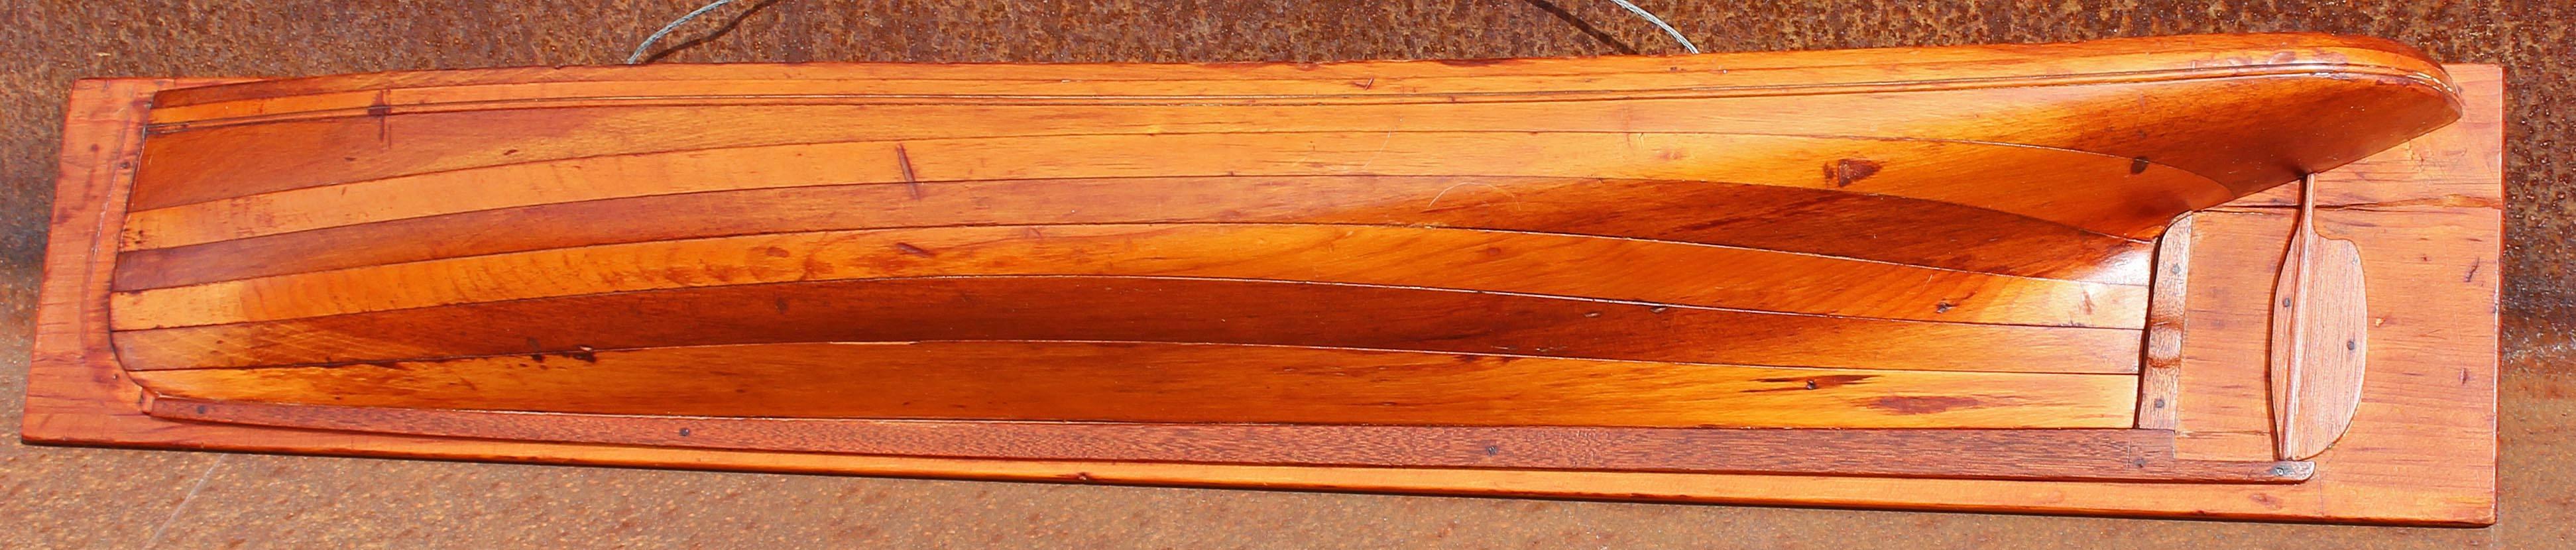 Handmade antique ships hull model, American, 19th century. Carved pine and mahogany. Warm old patina.